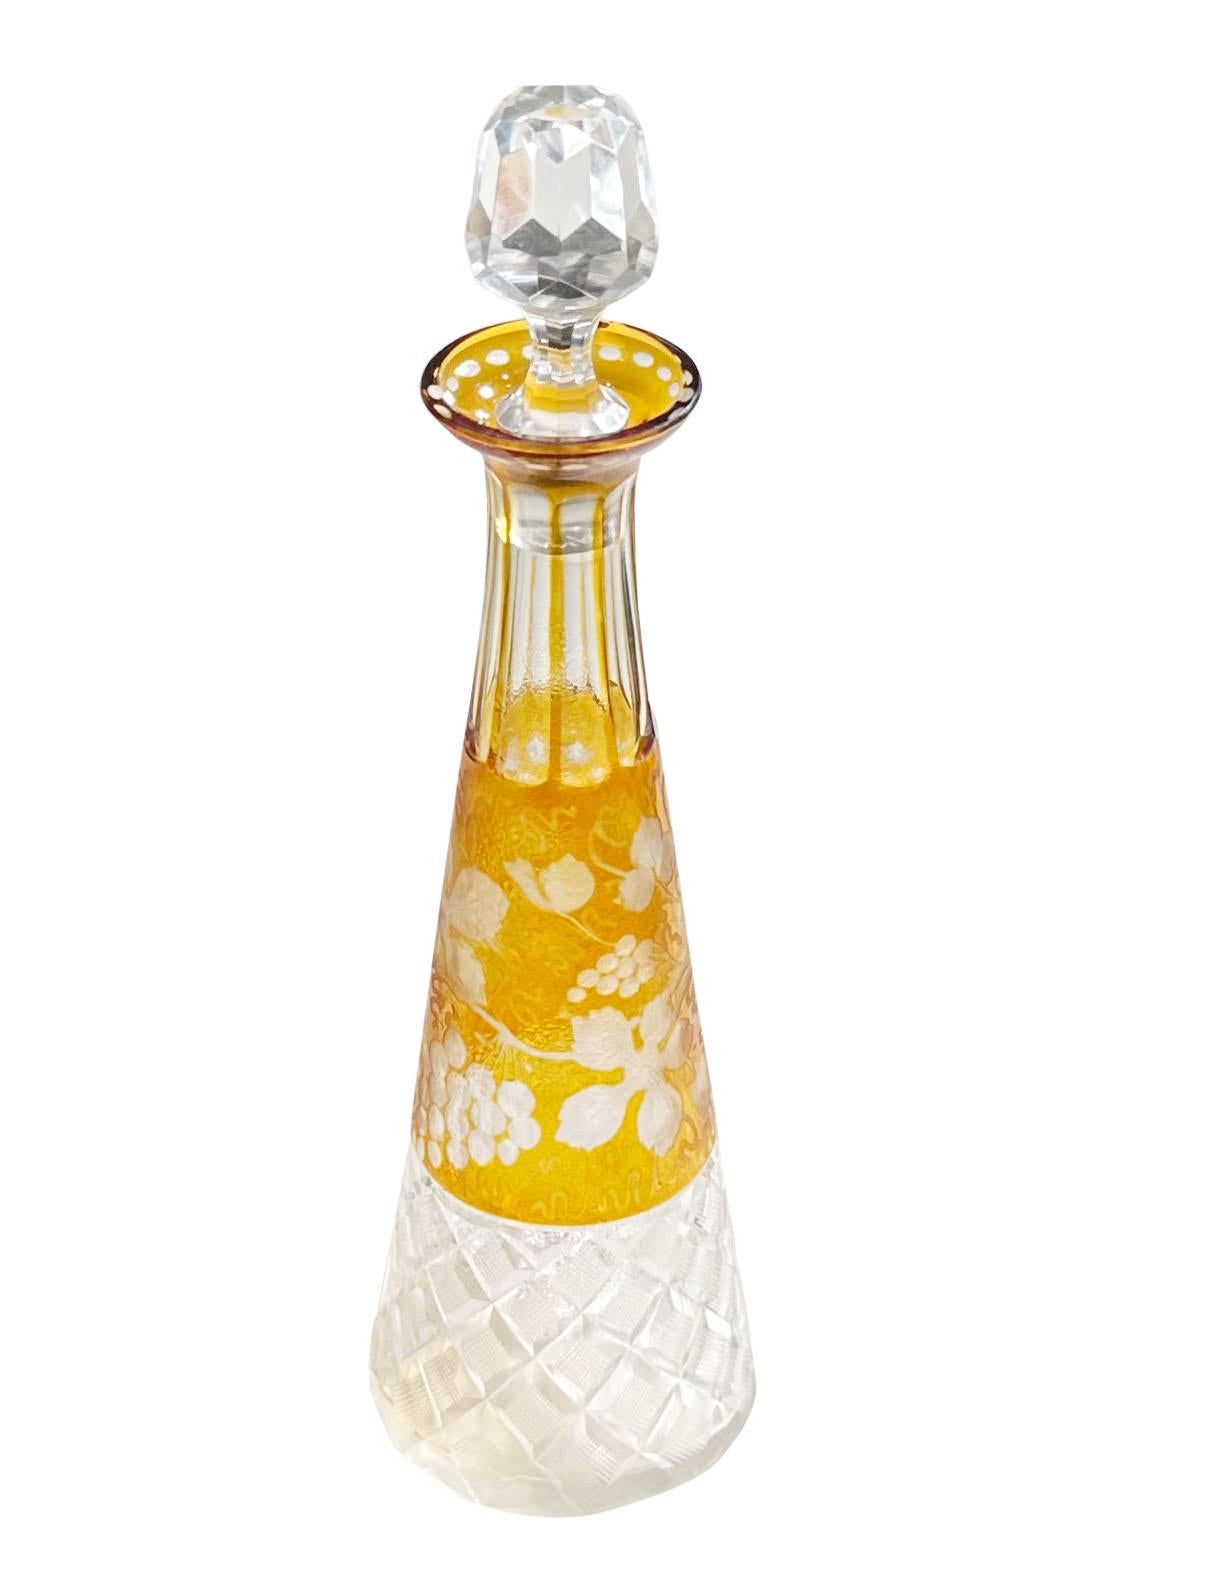 A beautiful French small decanter with original stopper. The yellow is etched in vines with grapes that is cut to clear. The stopper is three inches long. 19th century, France.